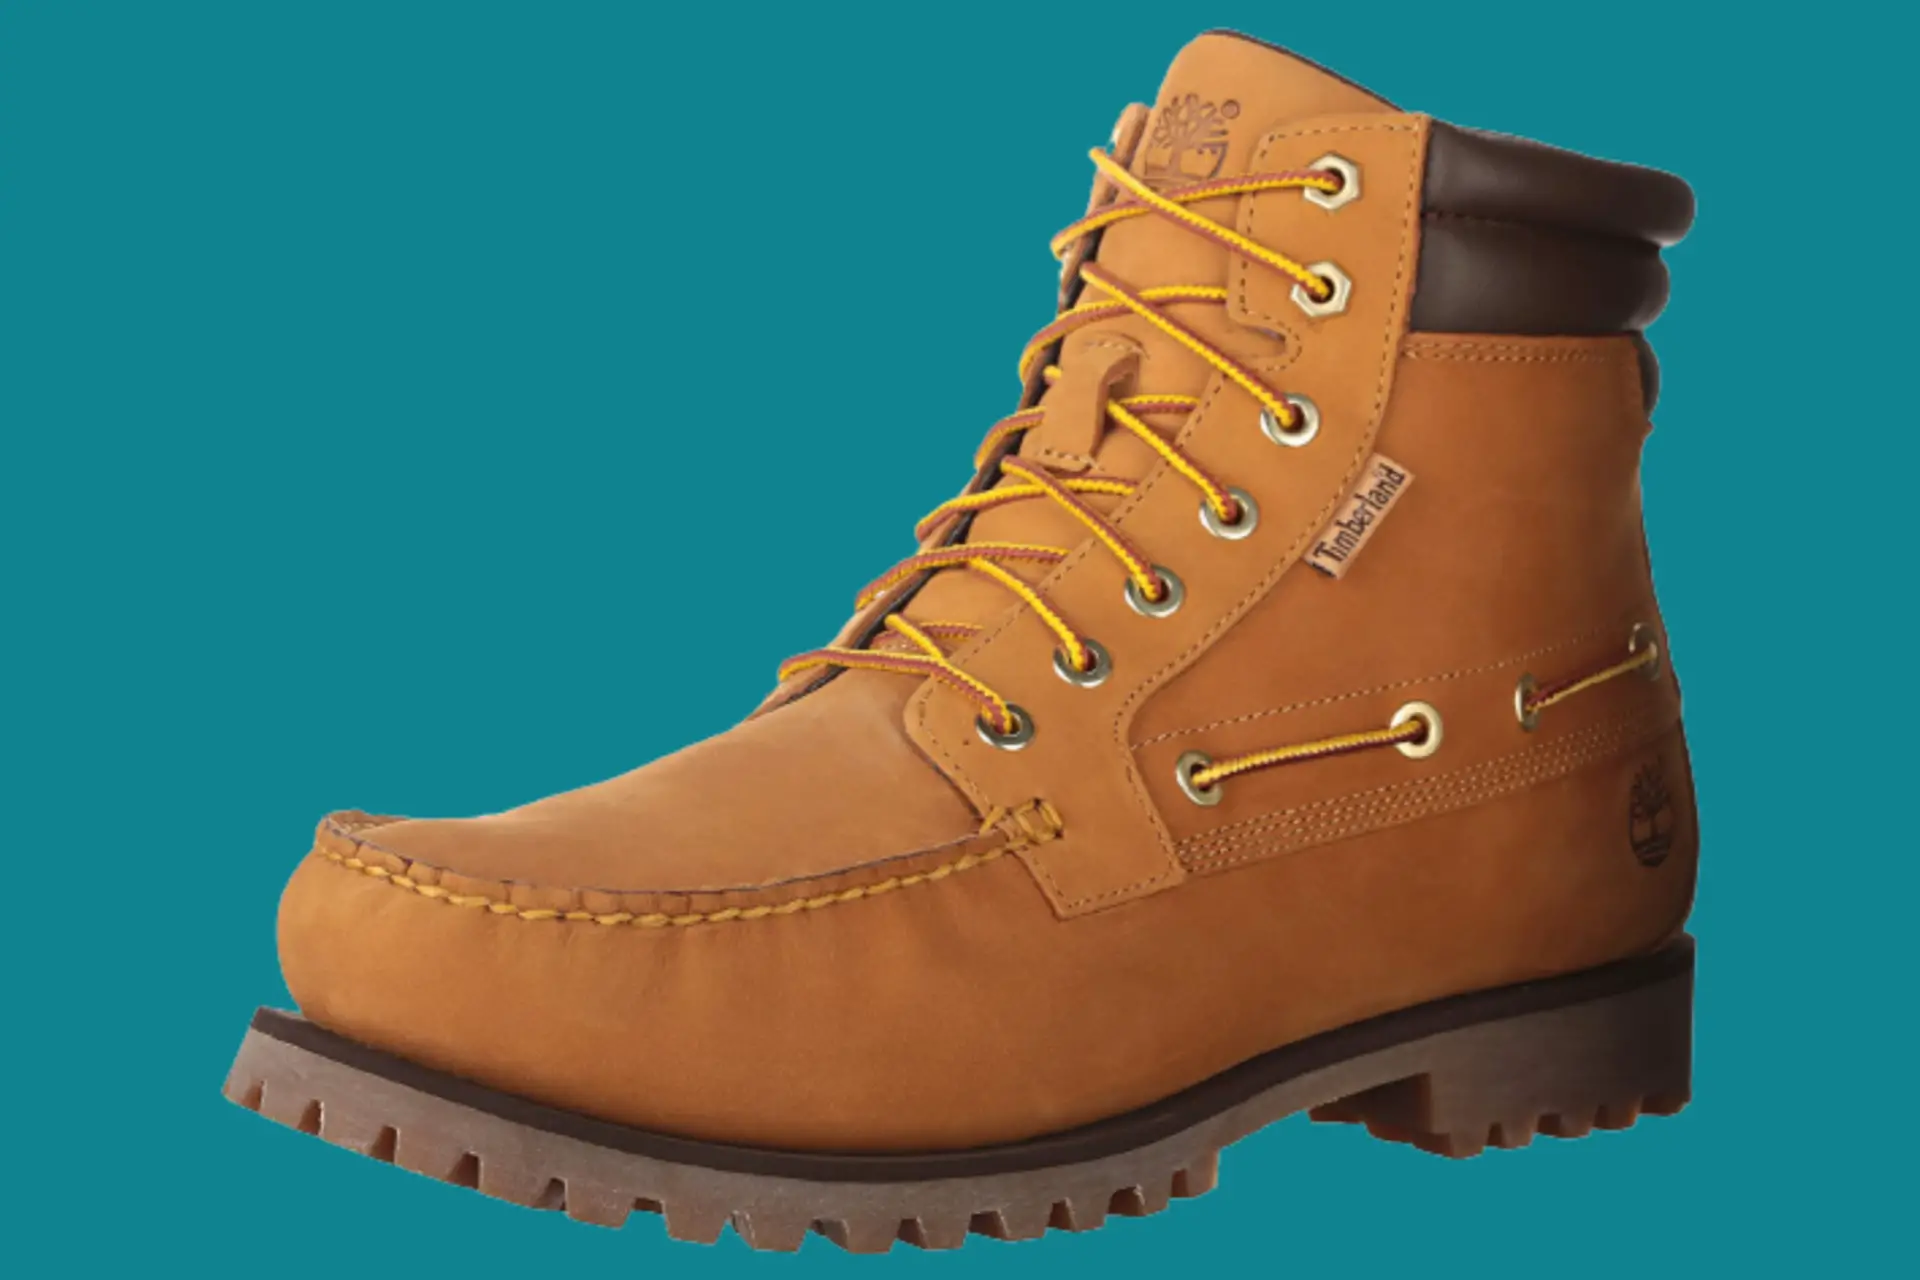 Comfy Timberland boots for hikers